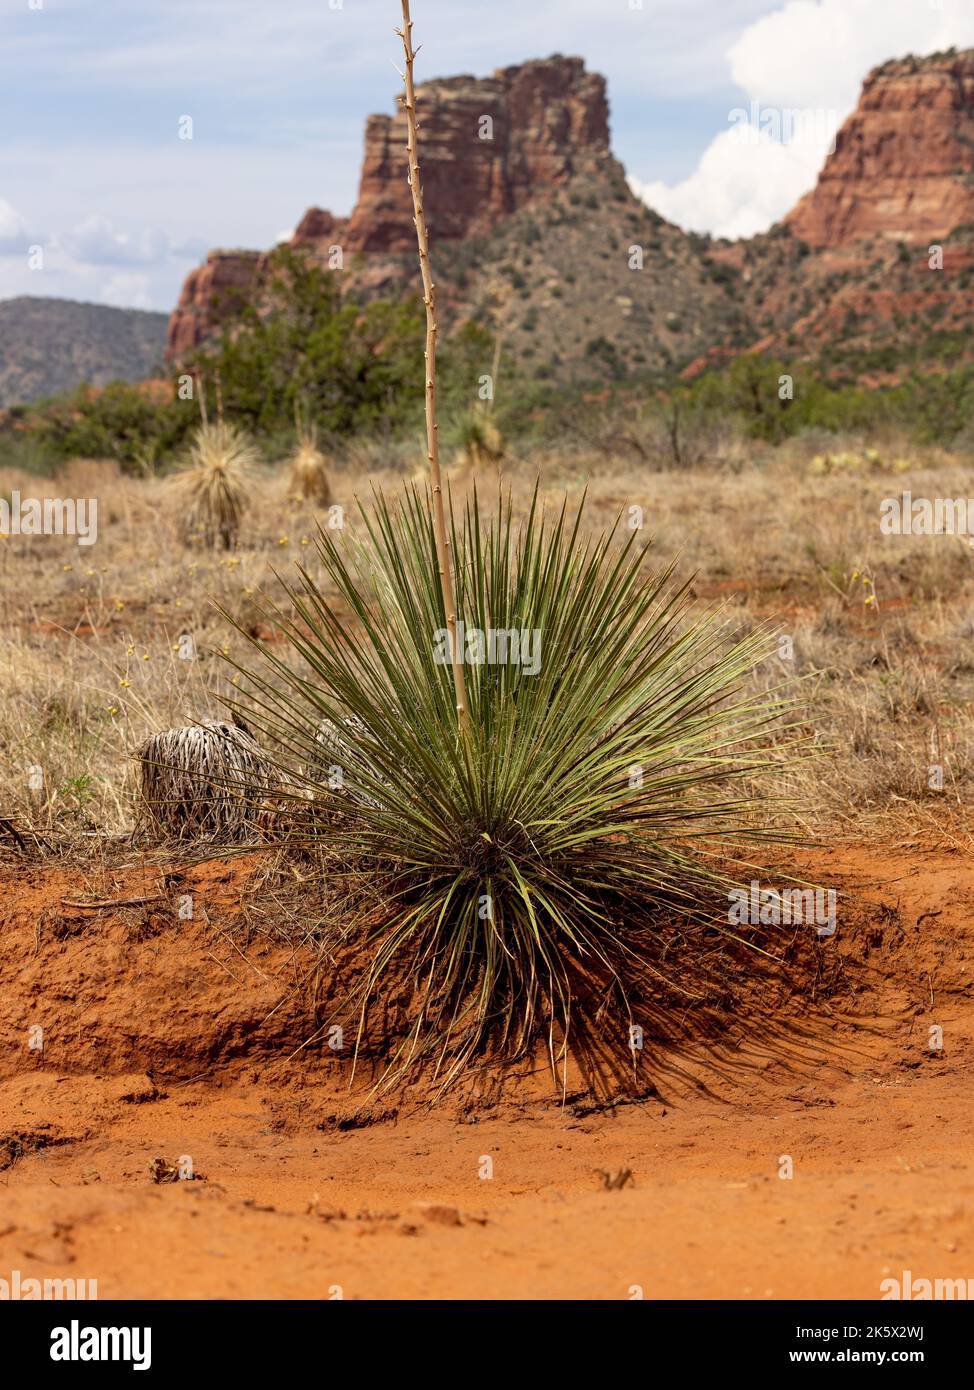 A Yucca utahensis plant in the desert Stock Photo